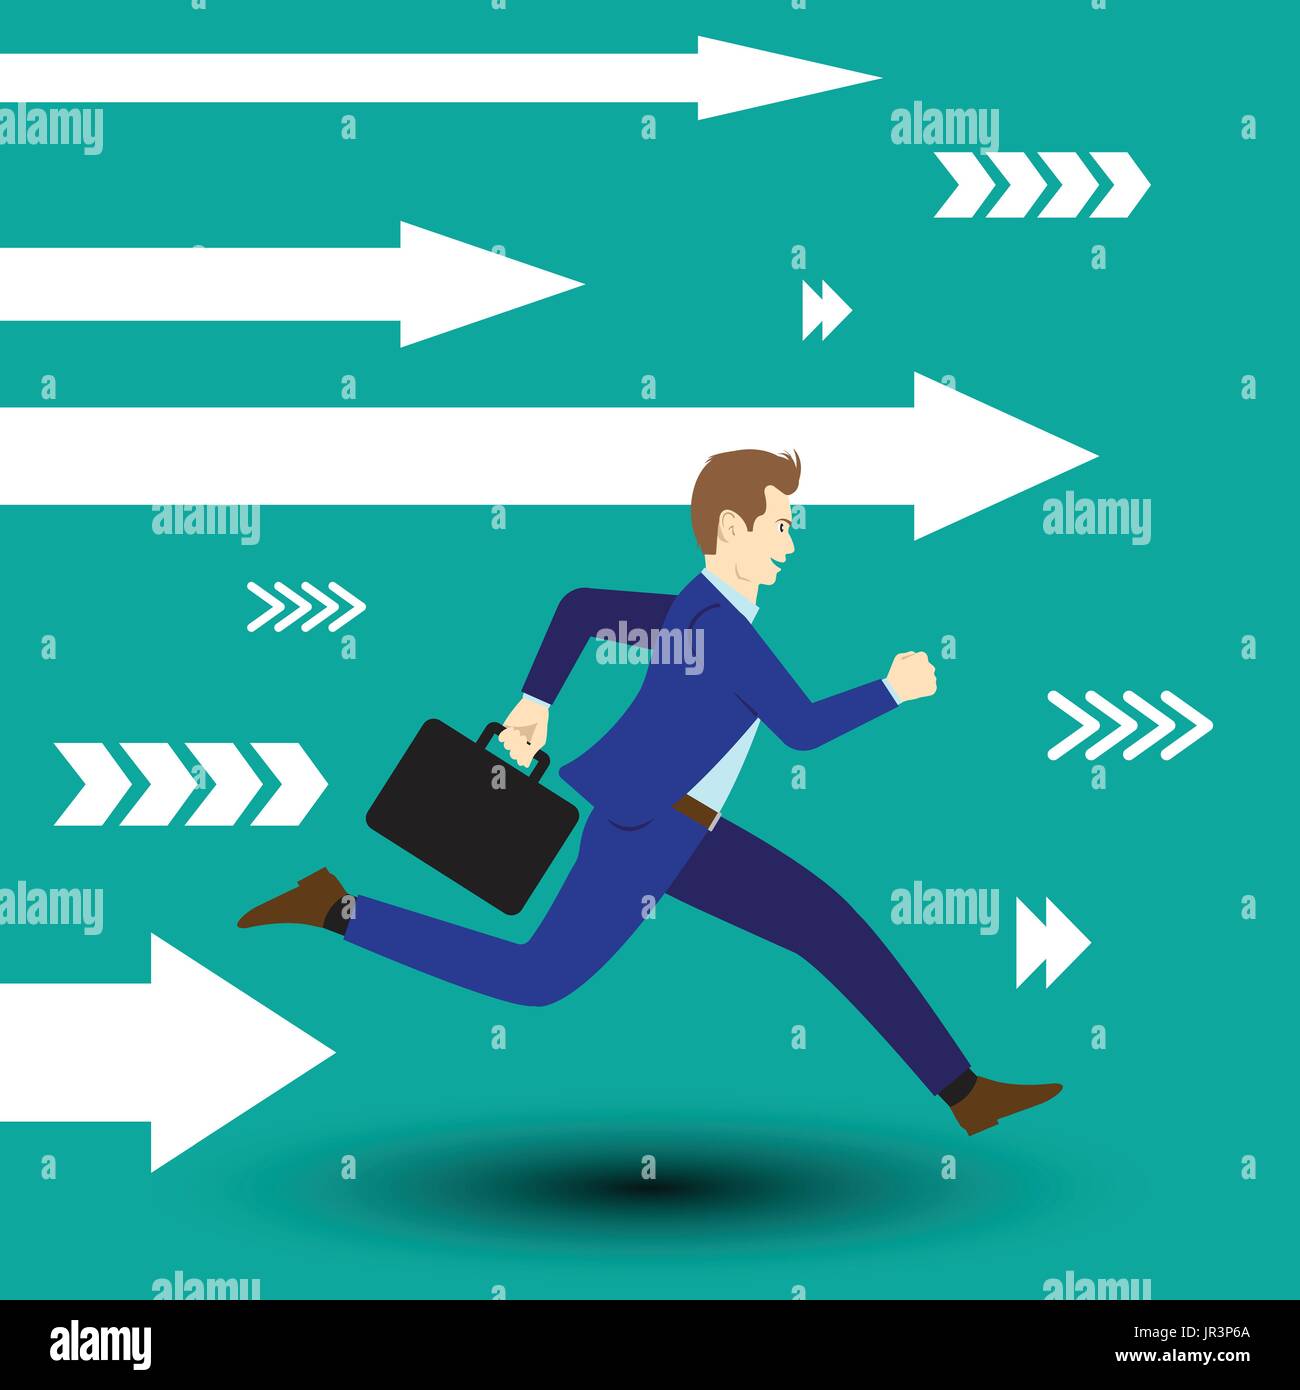 Business Opportunity Concept As A Businessman Is Running Forward In High Speed Along With White Arrows Full Of Motivation, Attempt, And Encouragement. Stock Vector